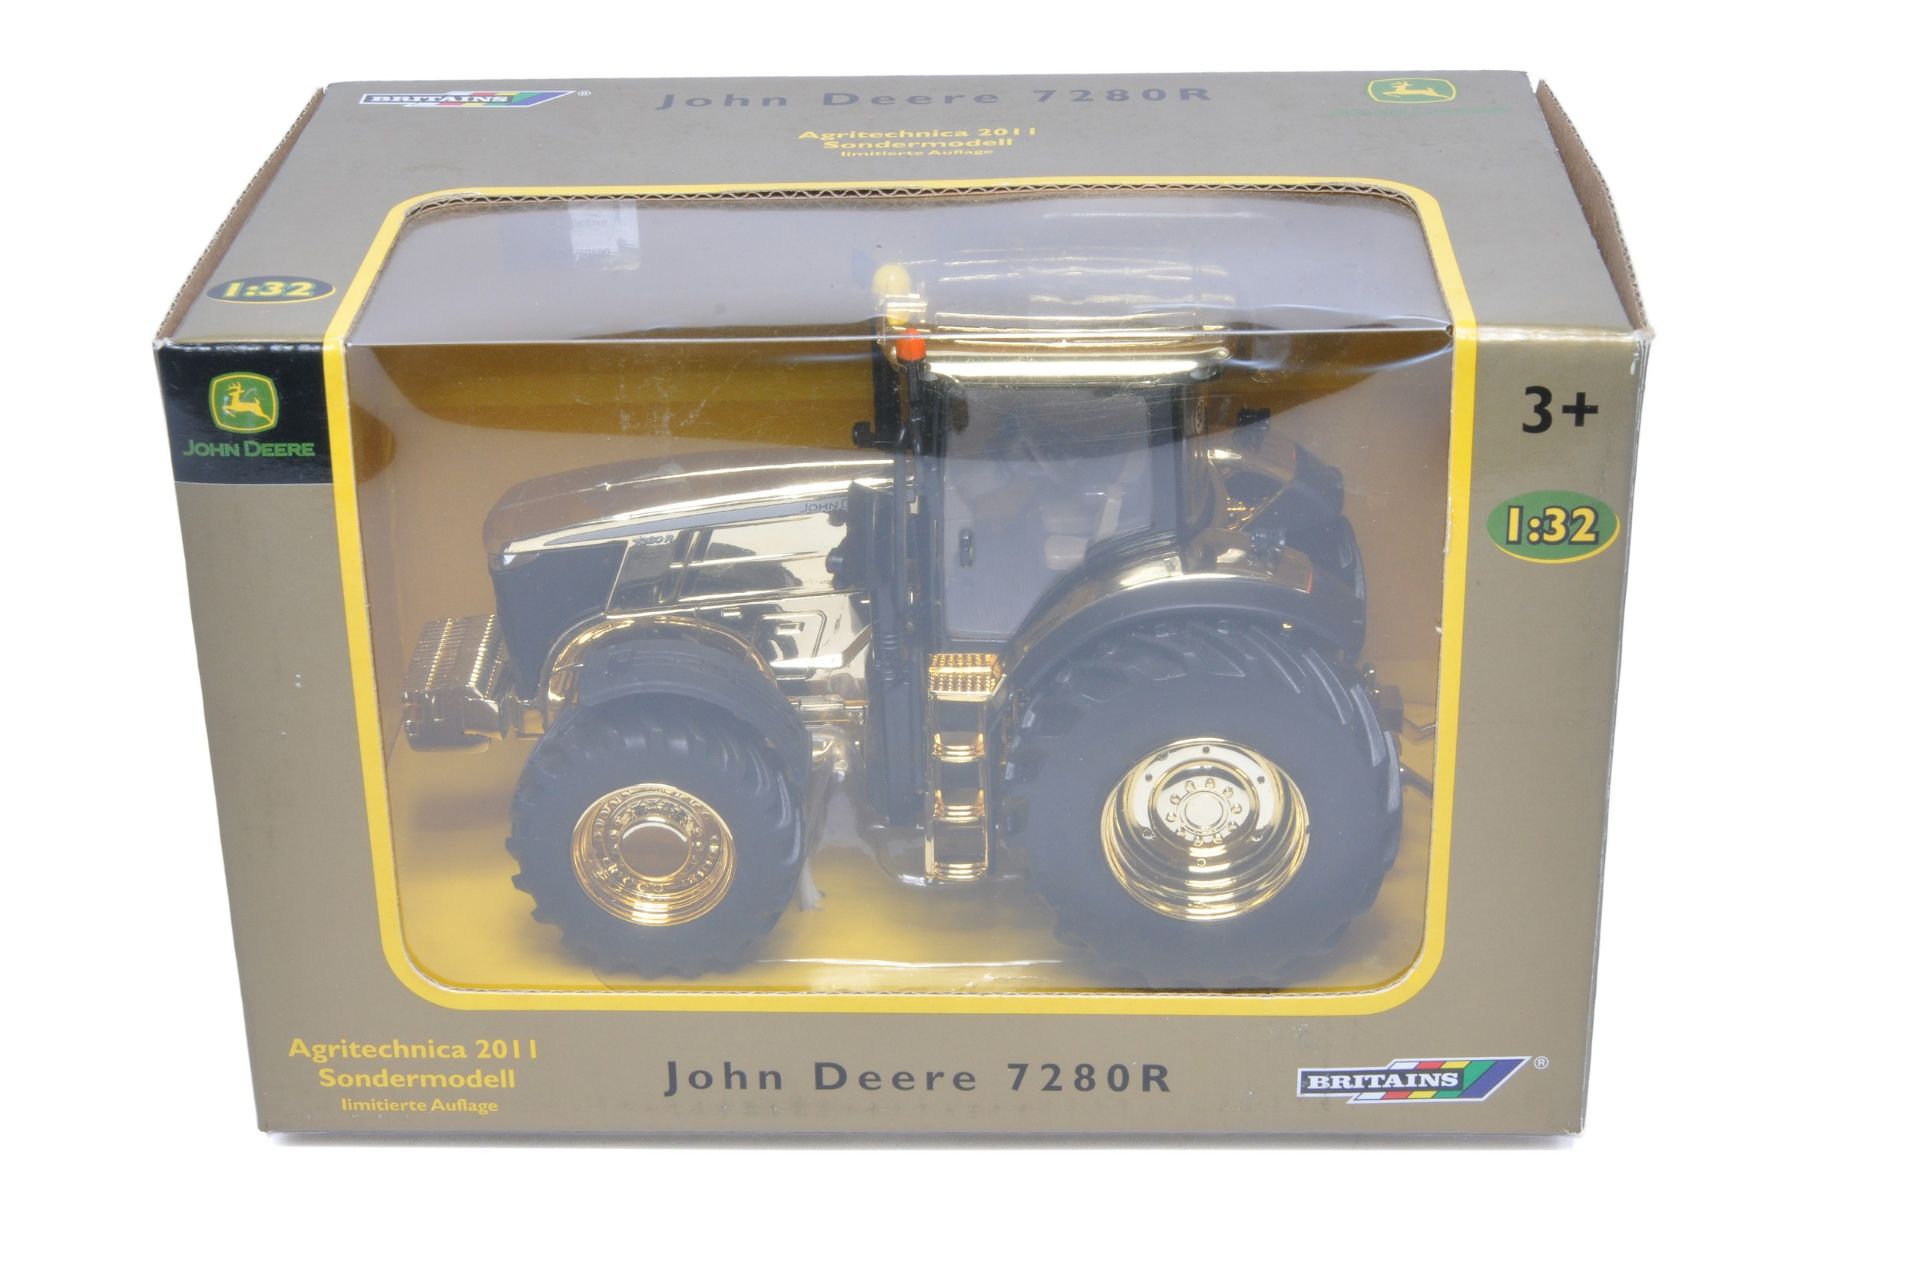 Britains Farm No. 42725 John Deere 7280R Tractor. Special Gold Edition for Agritechnica 2011. - Image 2 of 7